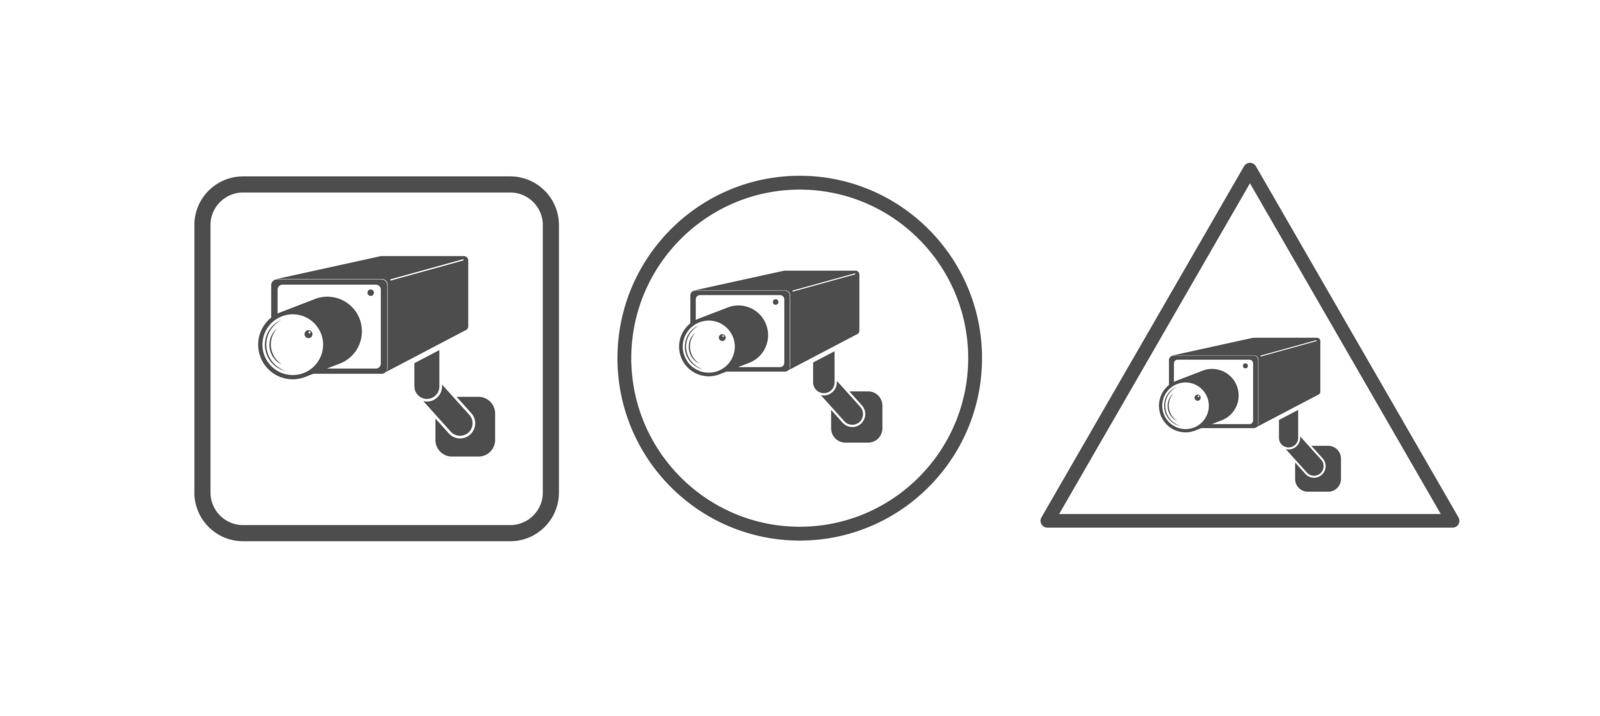 Set of icons of video surveillance. Camcorder icons. Empty outline by Grommik